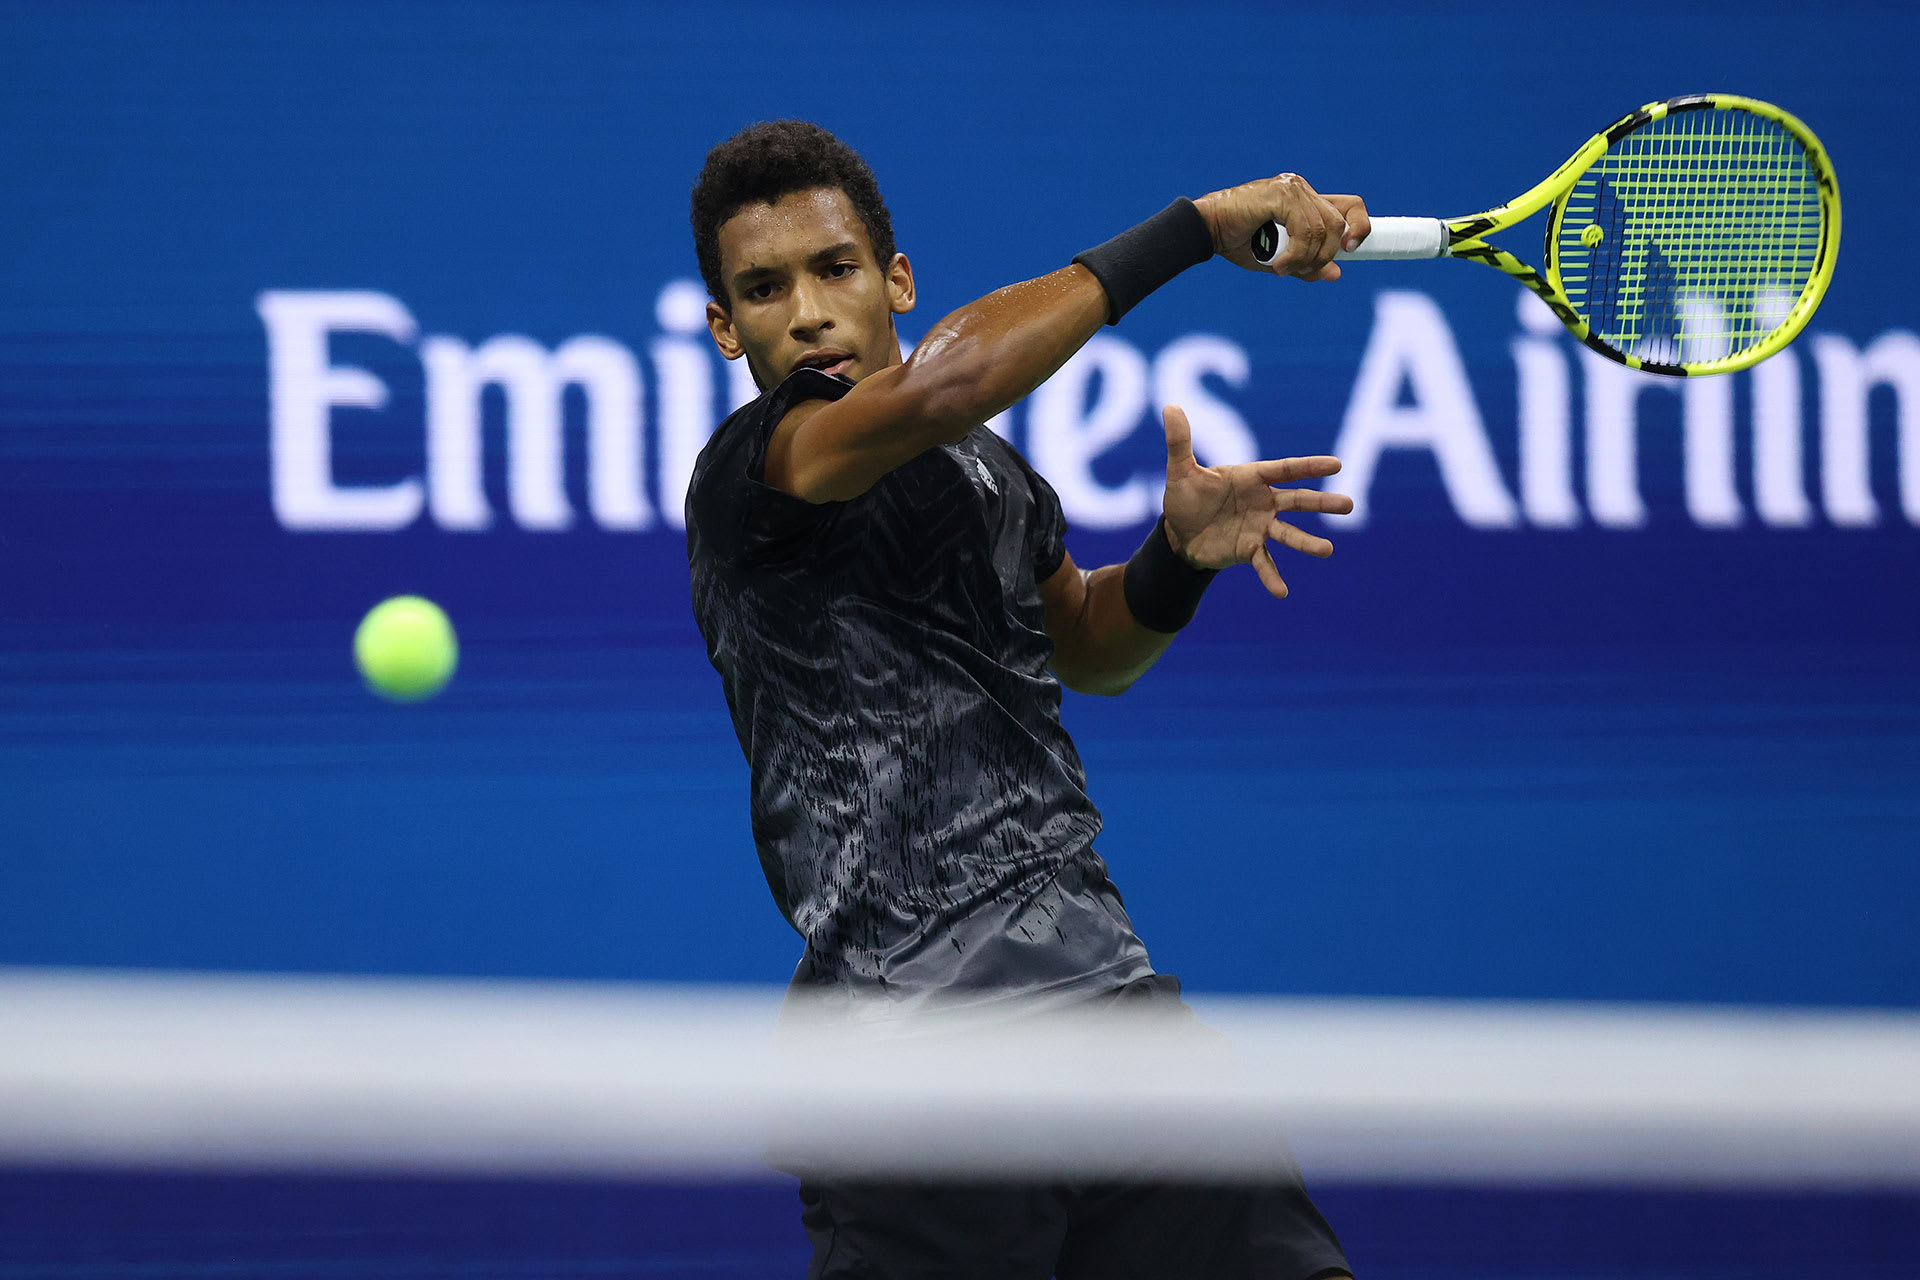 Felix Auger-Aliassime of Canada returns against Carlos Alcaraz of Spain during his Men’s Singles quarterfinals match on Day Nine of the 2021 US Open at the USTA Billie Jean King National Tennis Center on September 07, 2021 in the Flushing neighborhood of the Queens borough of New York City.